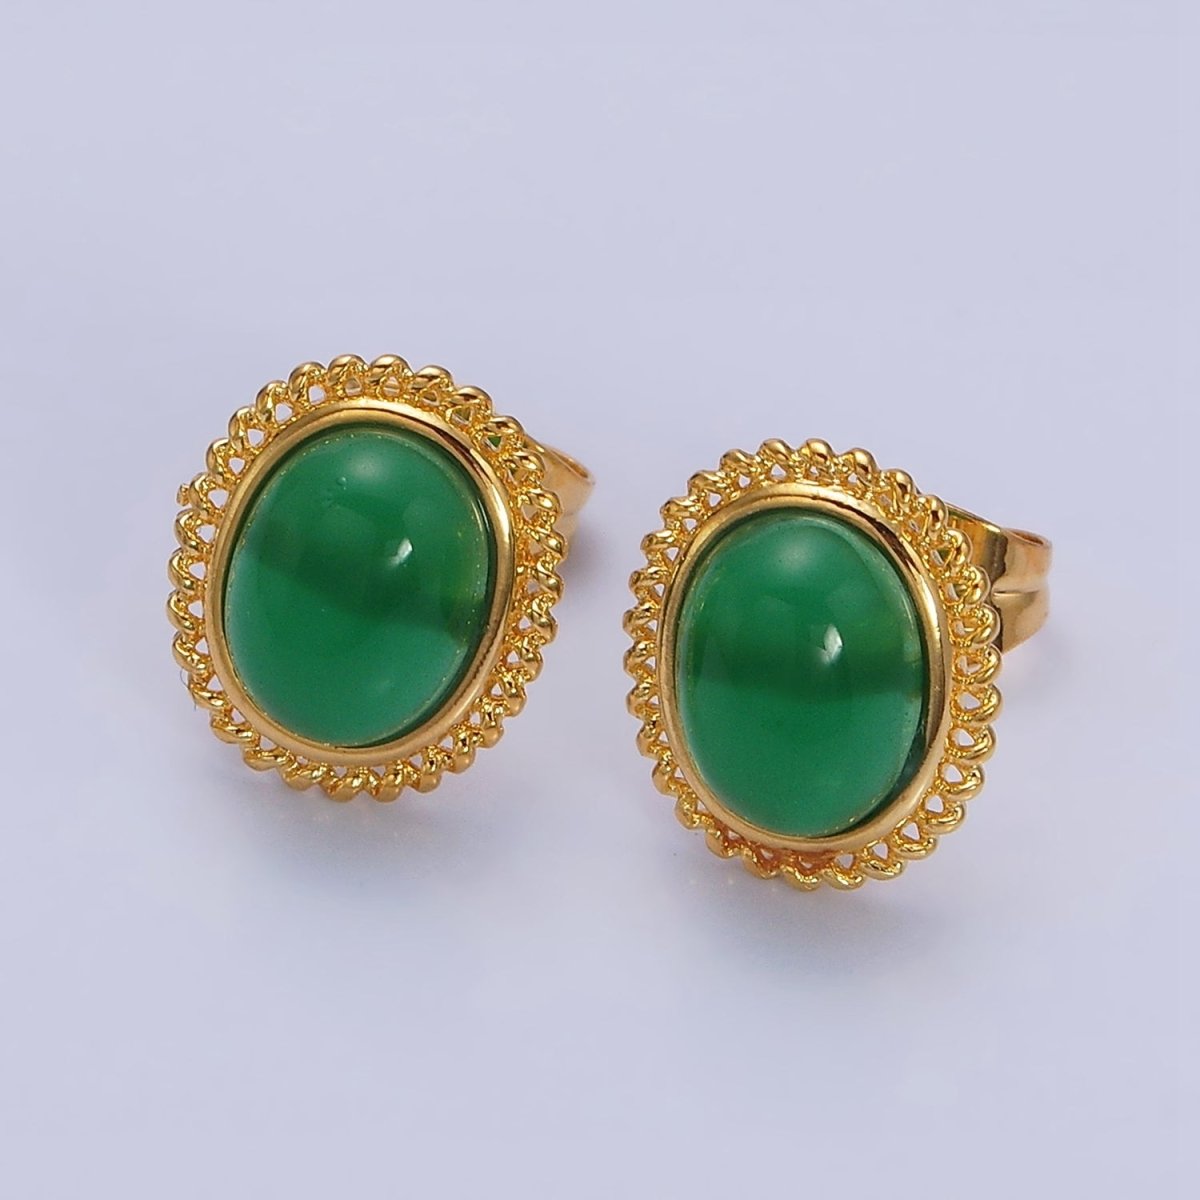 24K Gold Filled Green Jade Cabochon Rounded Stud Earrings | AD1429 - DLUXCA